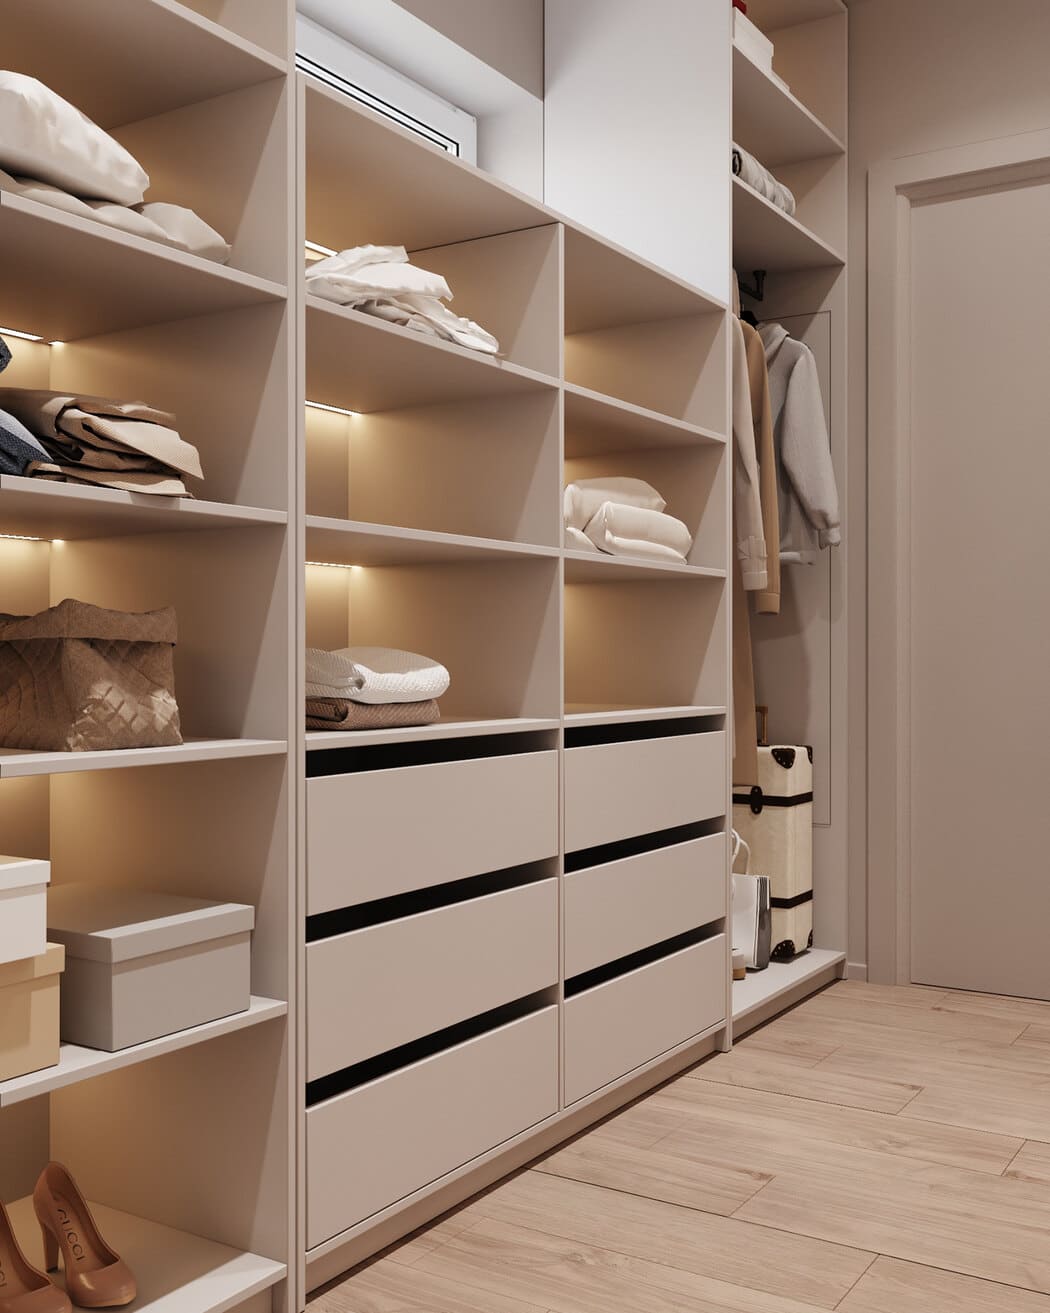 Aesthetic apartment for a young family, wardrobe, photo 8